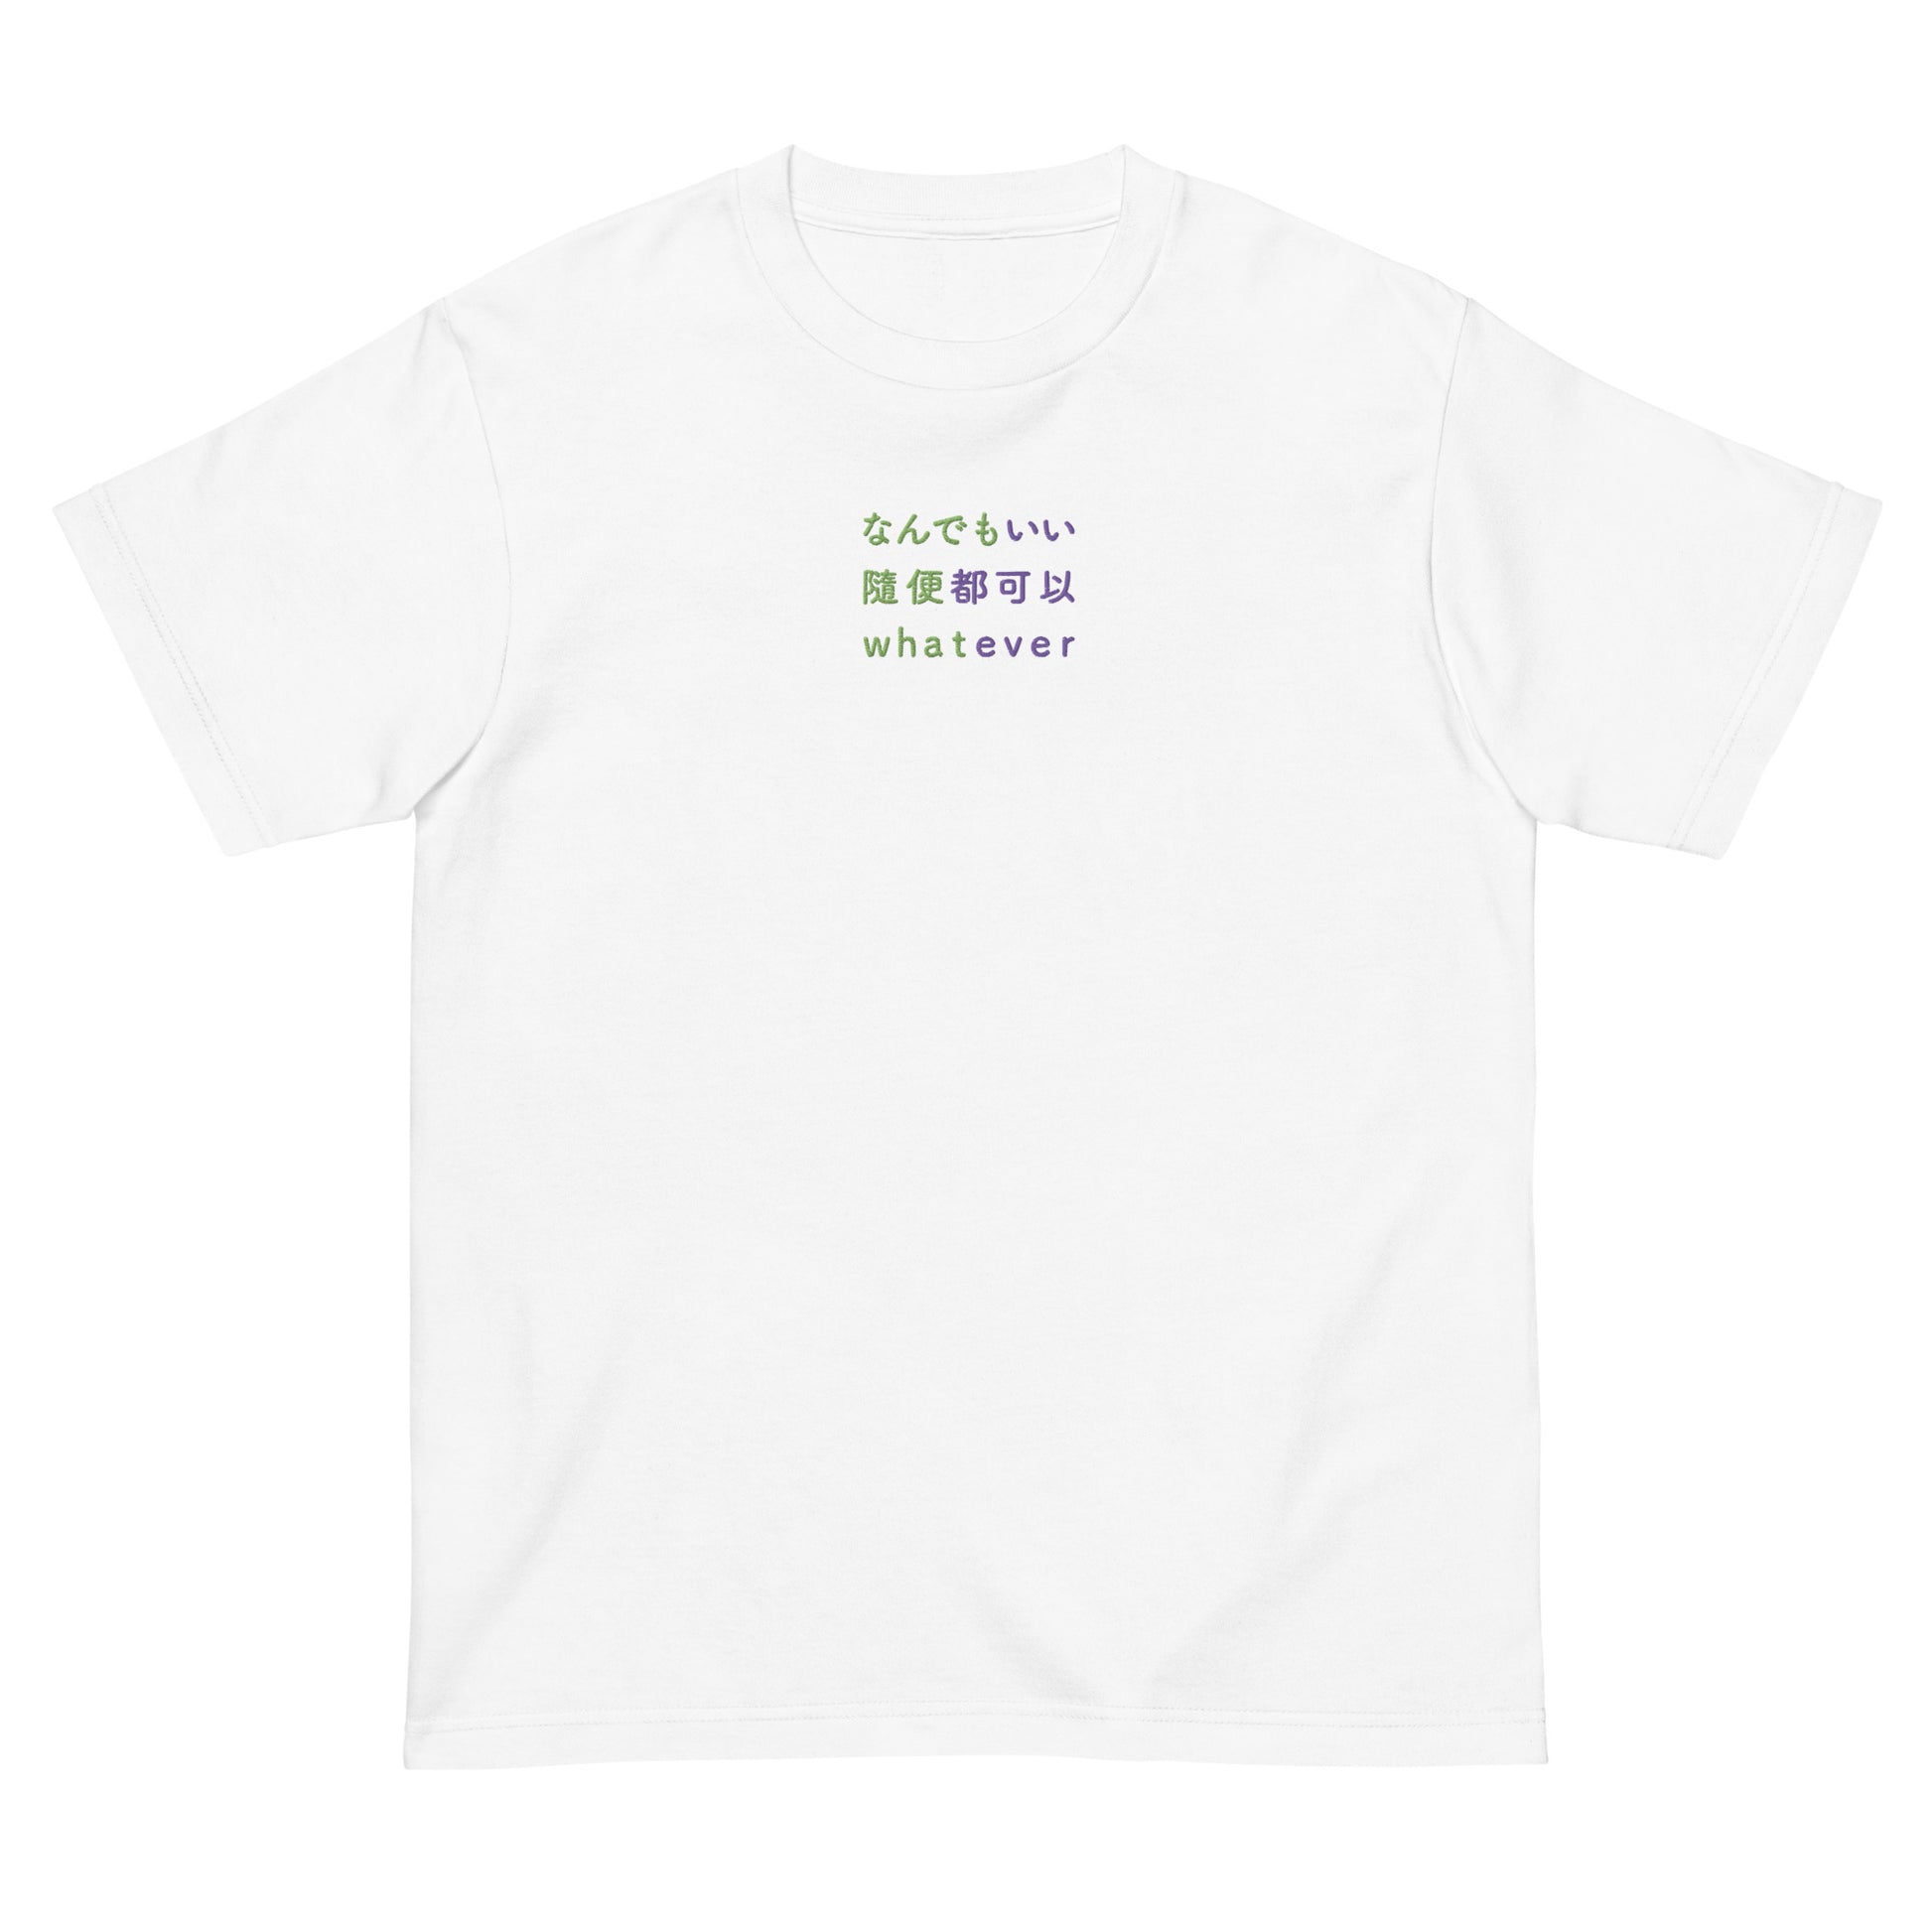 White High Quality Tee - Front Design with an Green,Purple Embroidery "Whatever" in Japanese,Chinese and English